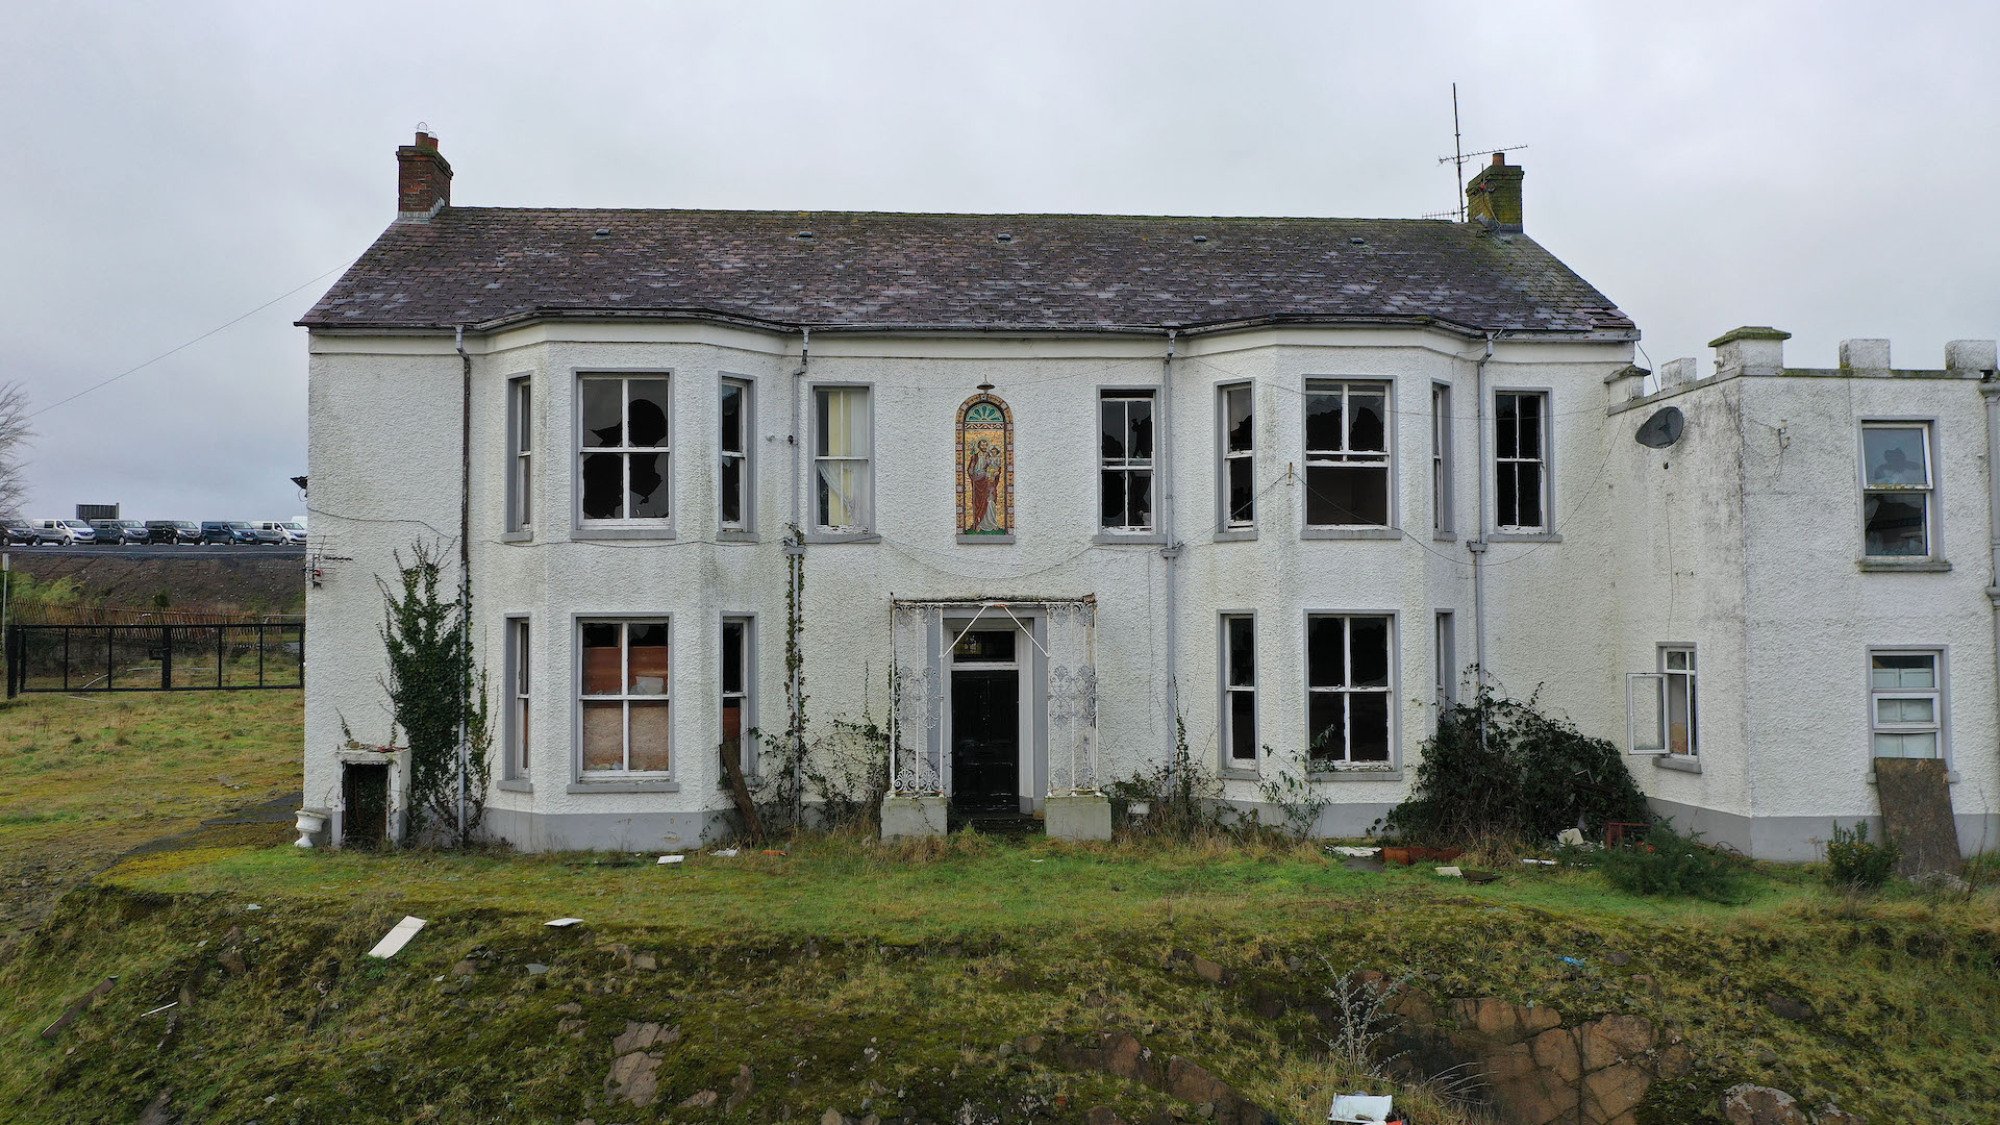 The former Marianvale mother and baby home in Newry, run by the Good Shepherd Sisters, photographed in 2021.